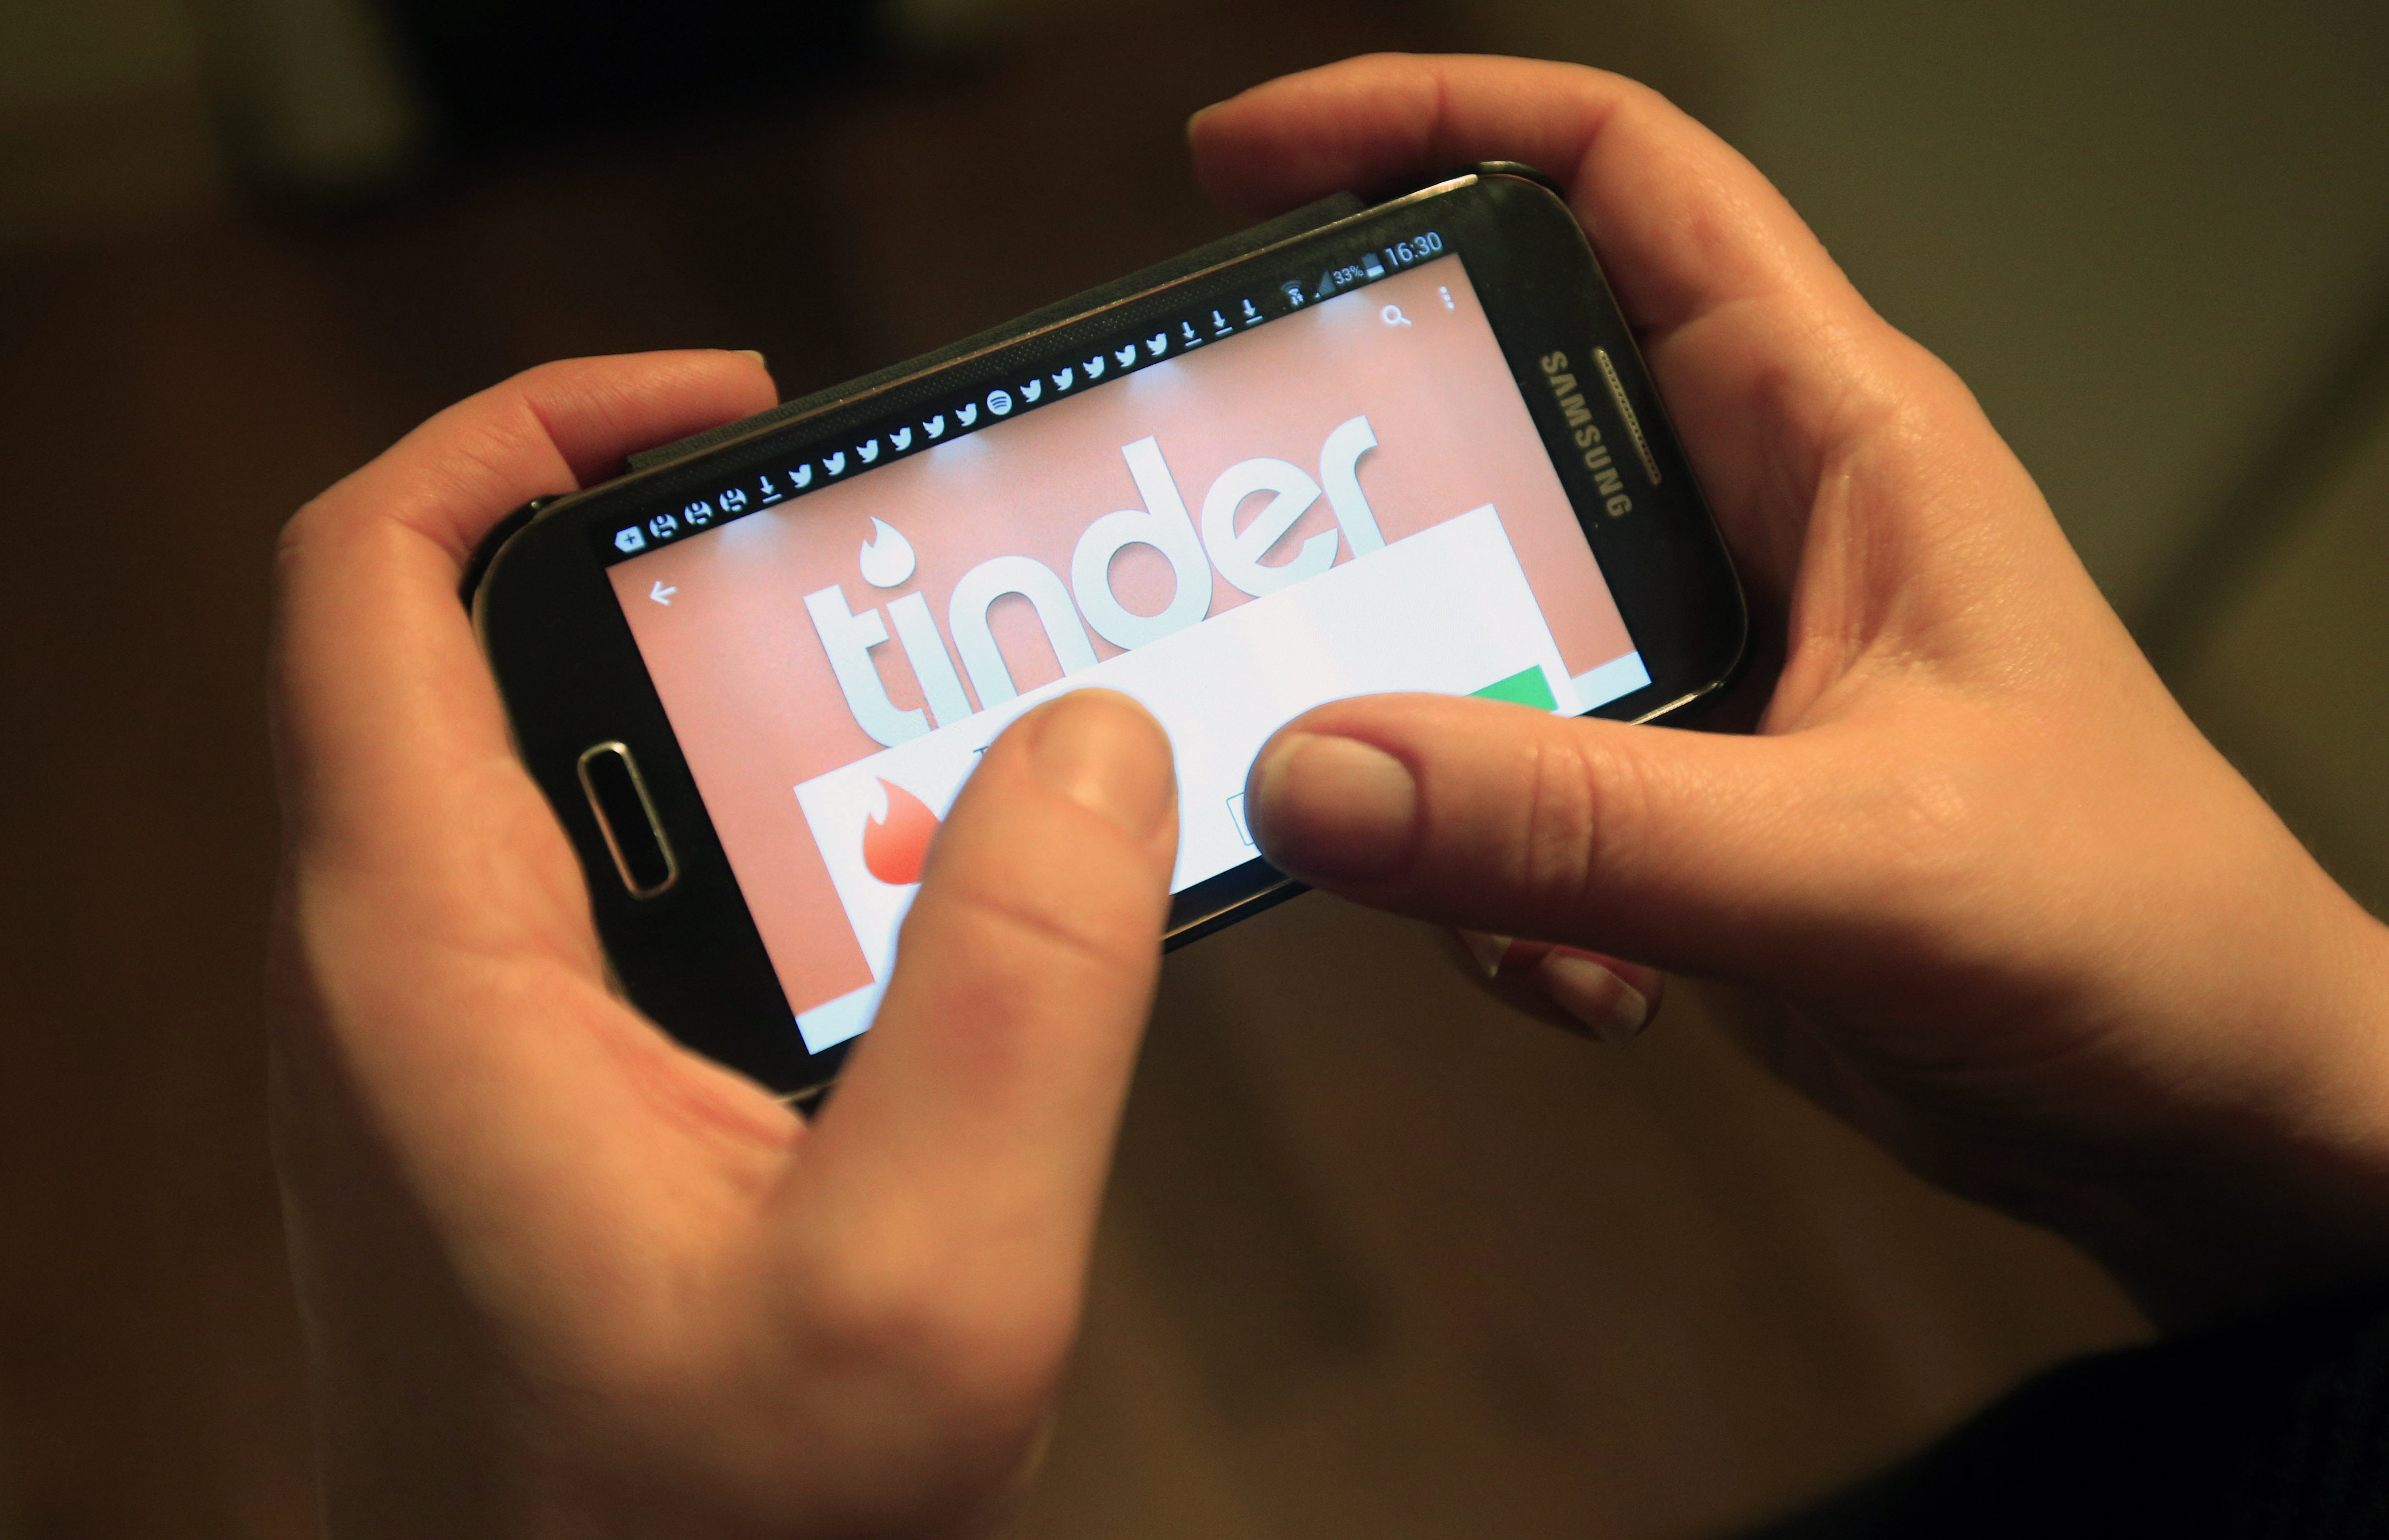 The Tinder app in use on a Samsung smartphone